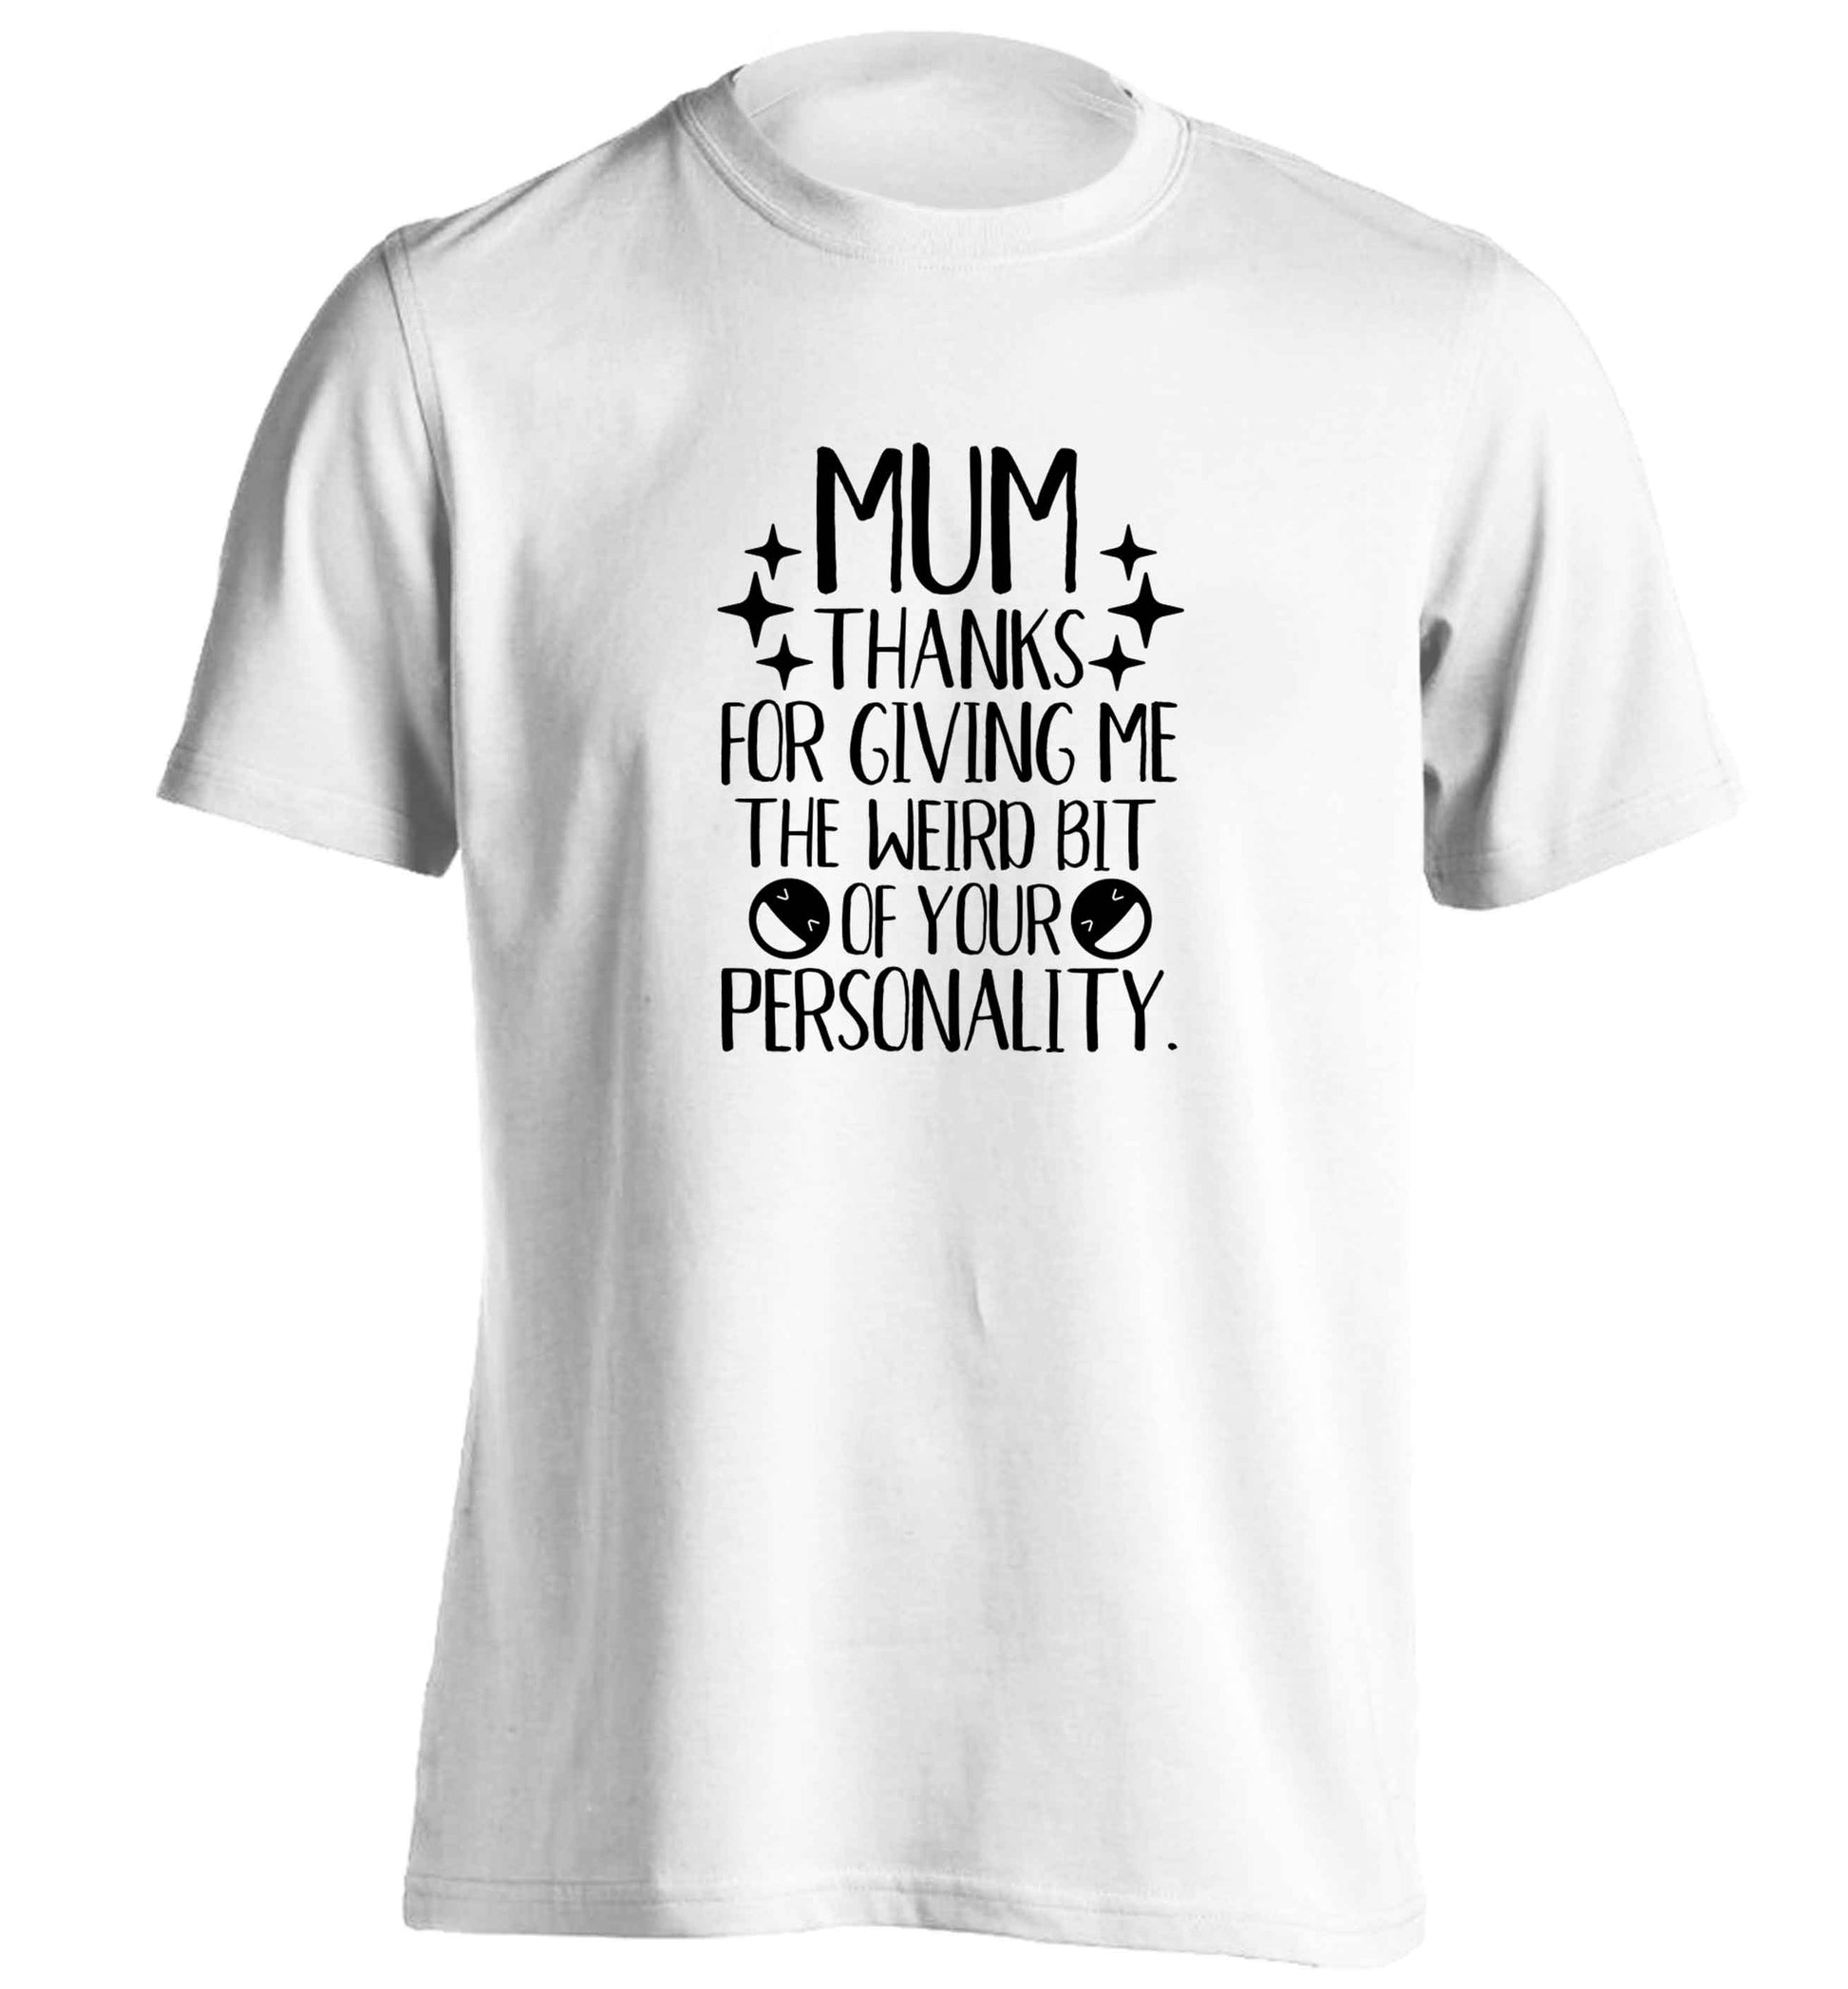 Mum, I love you more than halloumi and if you know me at all you know how deep that is adults unisex white Tshirt 2XL